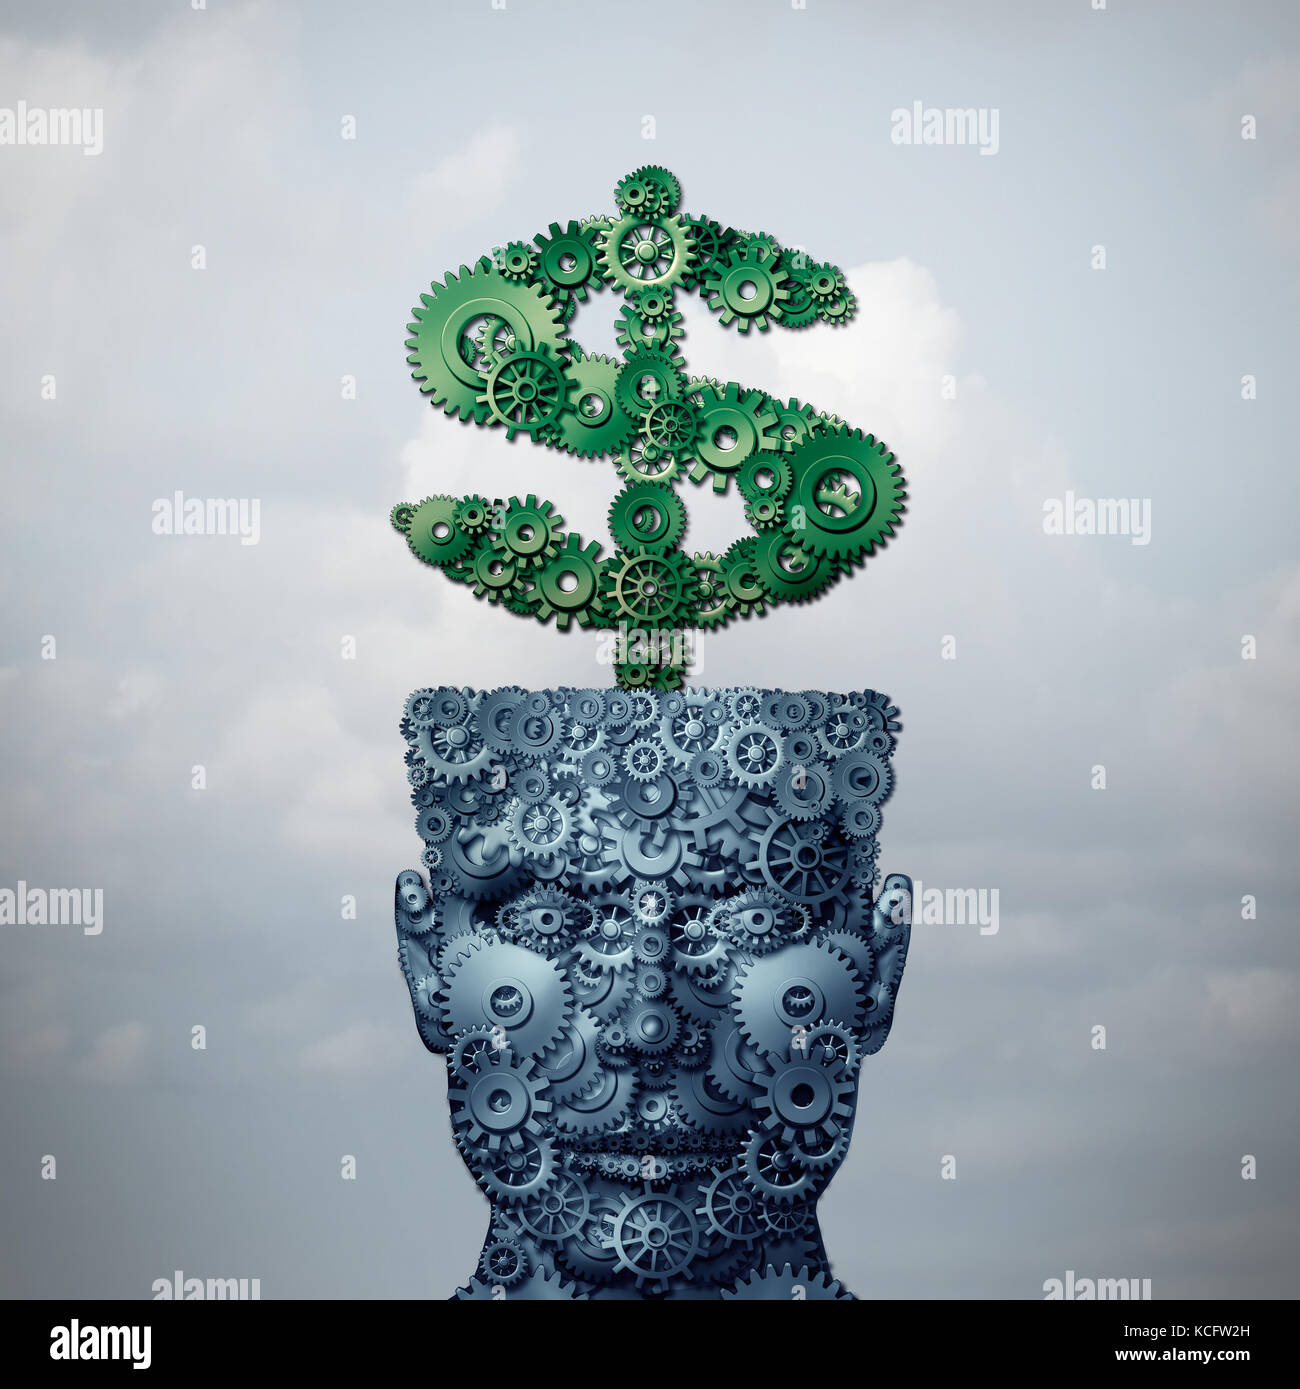 Intelligent money and financial investing intelligence as a head and dollar sign made of gear and cog wheels as a 3D illustration. Stock Photo